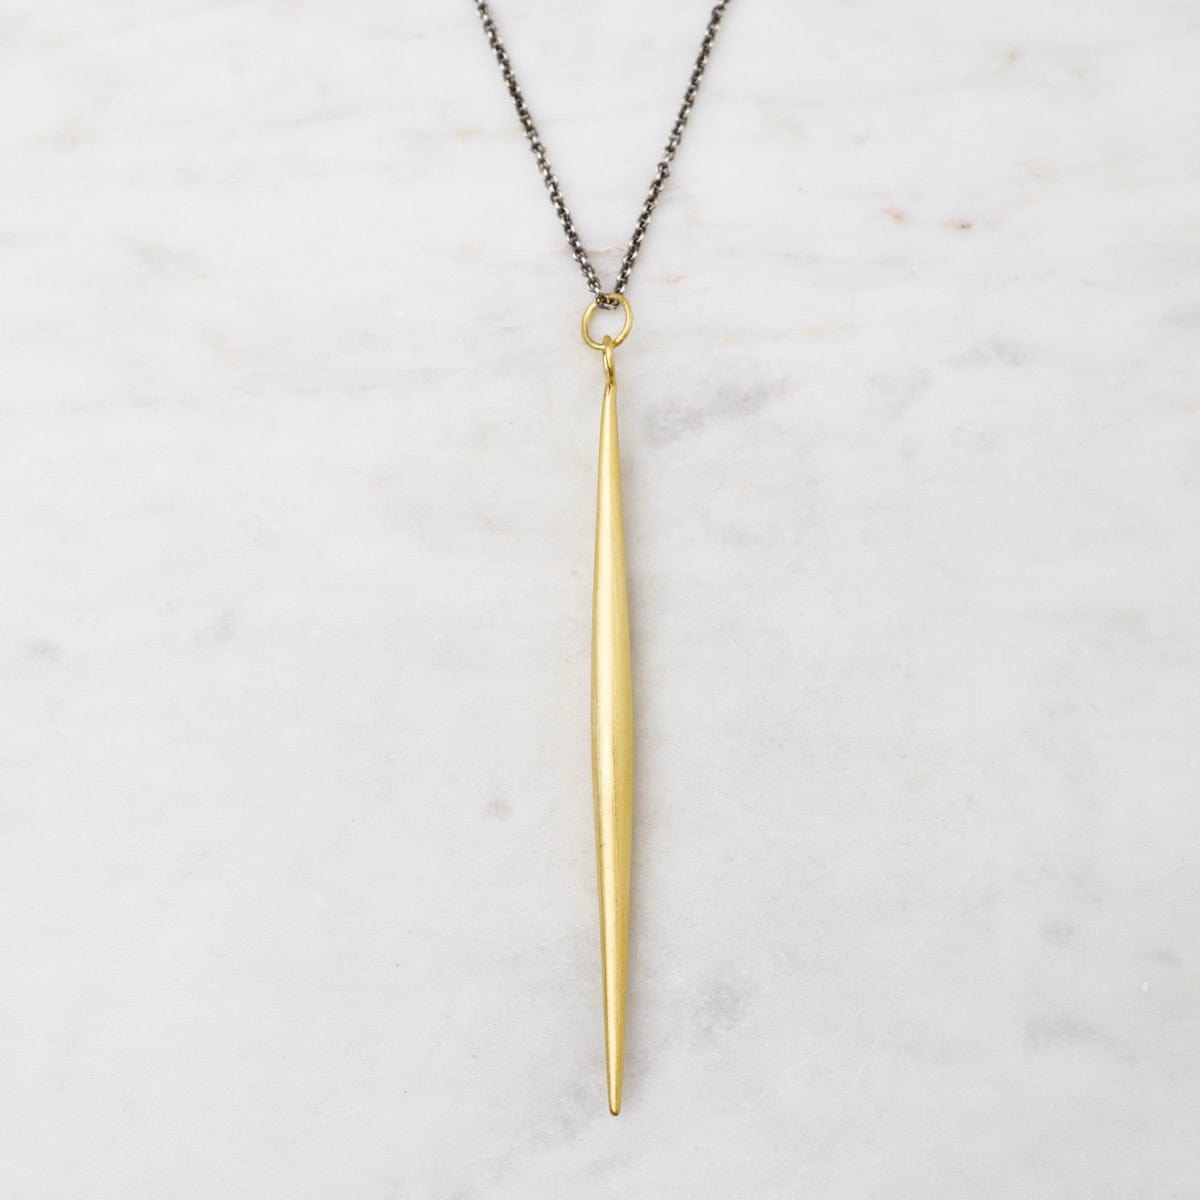 NKL Gold Plated Brass Spike Pendant Necklace